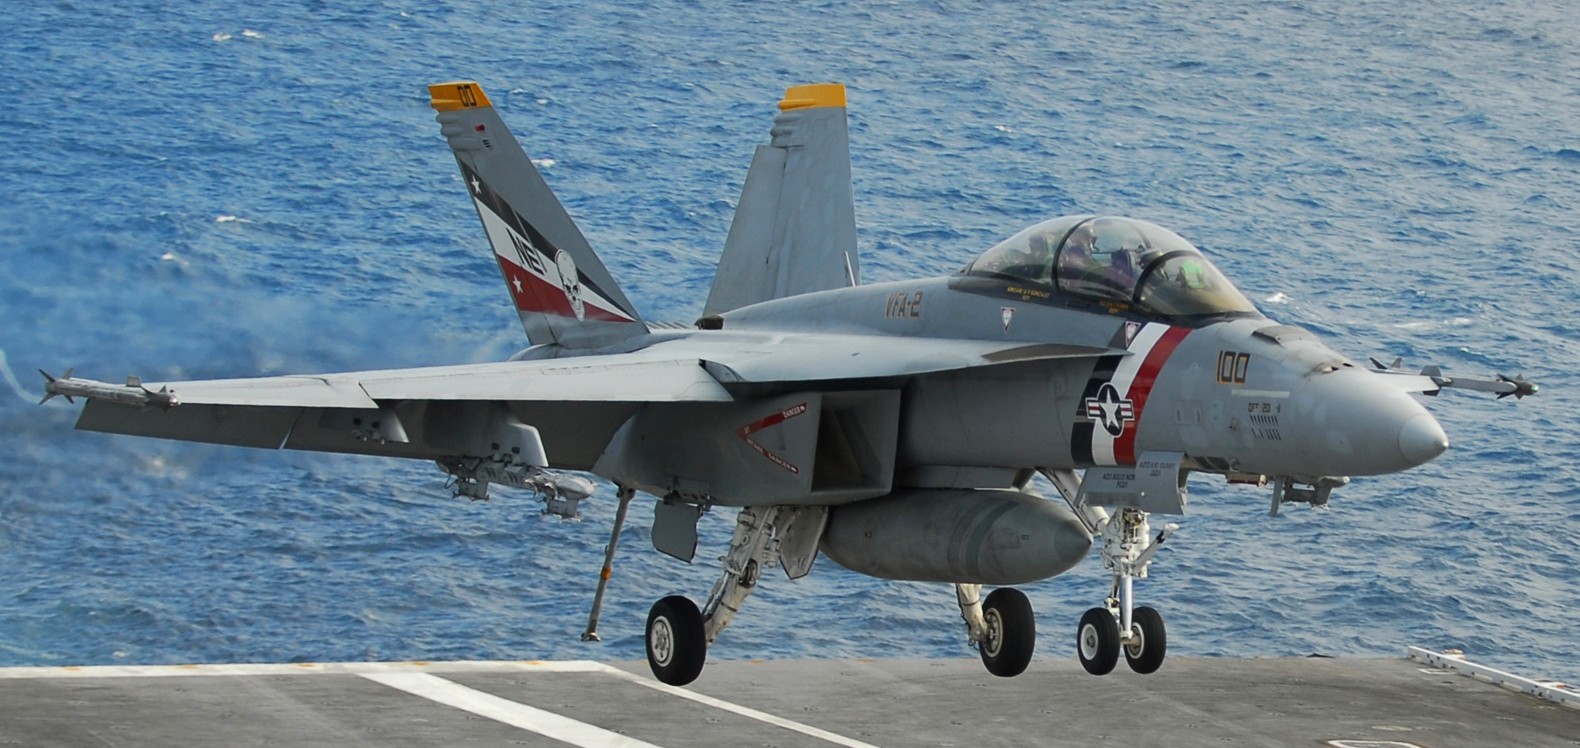 vfa-2 bounty hunters strike fighter squadron us navy f/a-18f super hornet carrier air wing cvw-2 uss abraham lincoln cvn-72 69